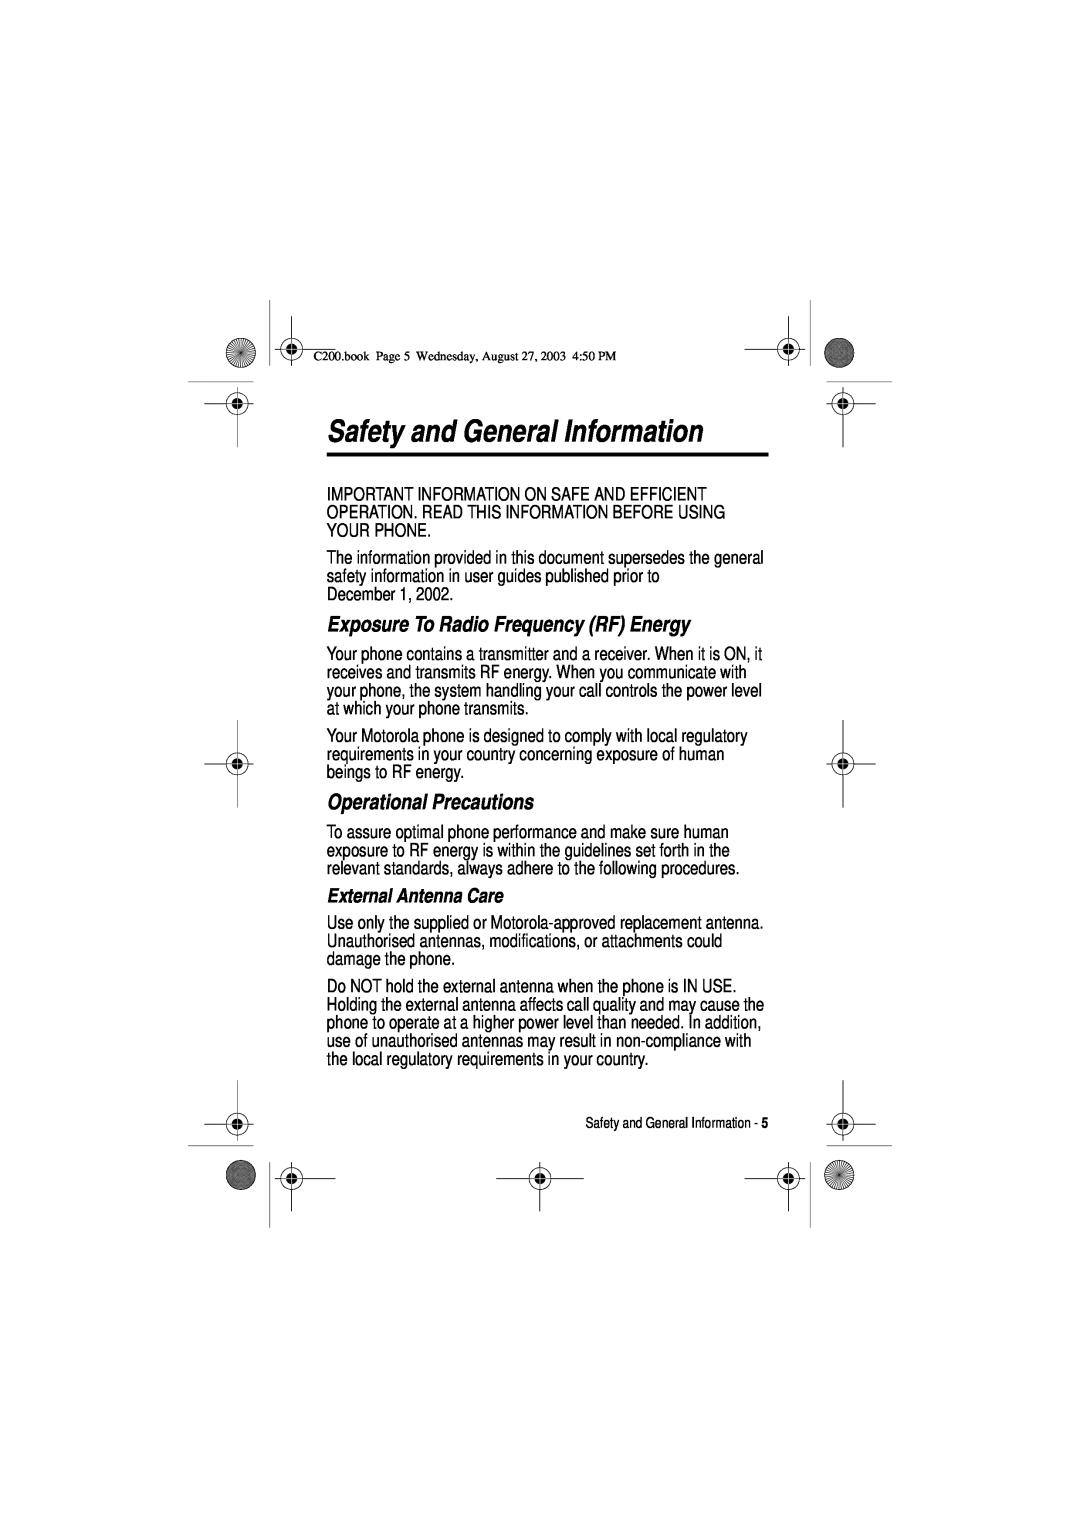 Motorola C200 manual Safety and General Information, Exposure To Radio Frequency RF Energy, Operational Precautions 